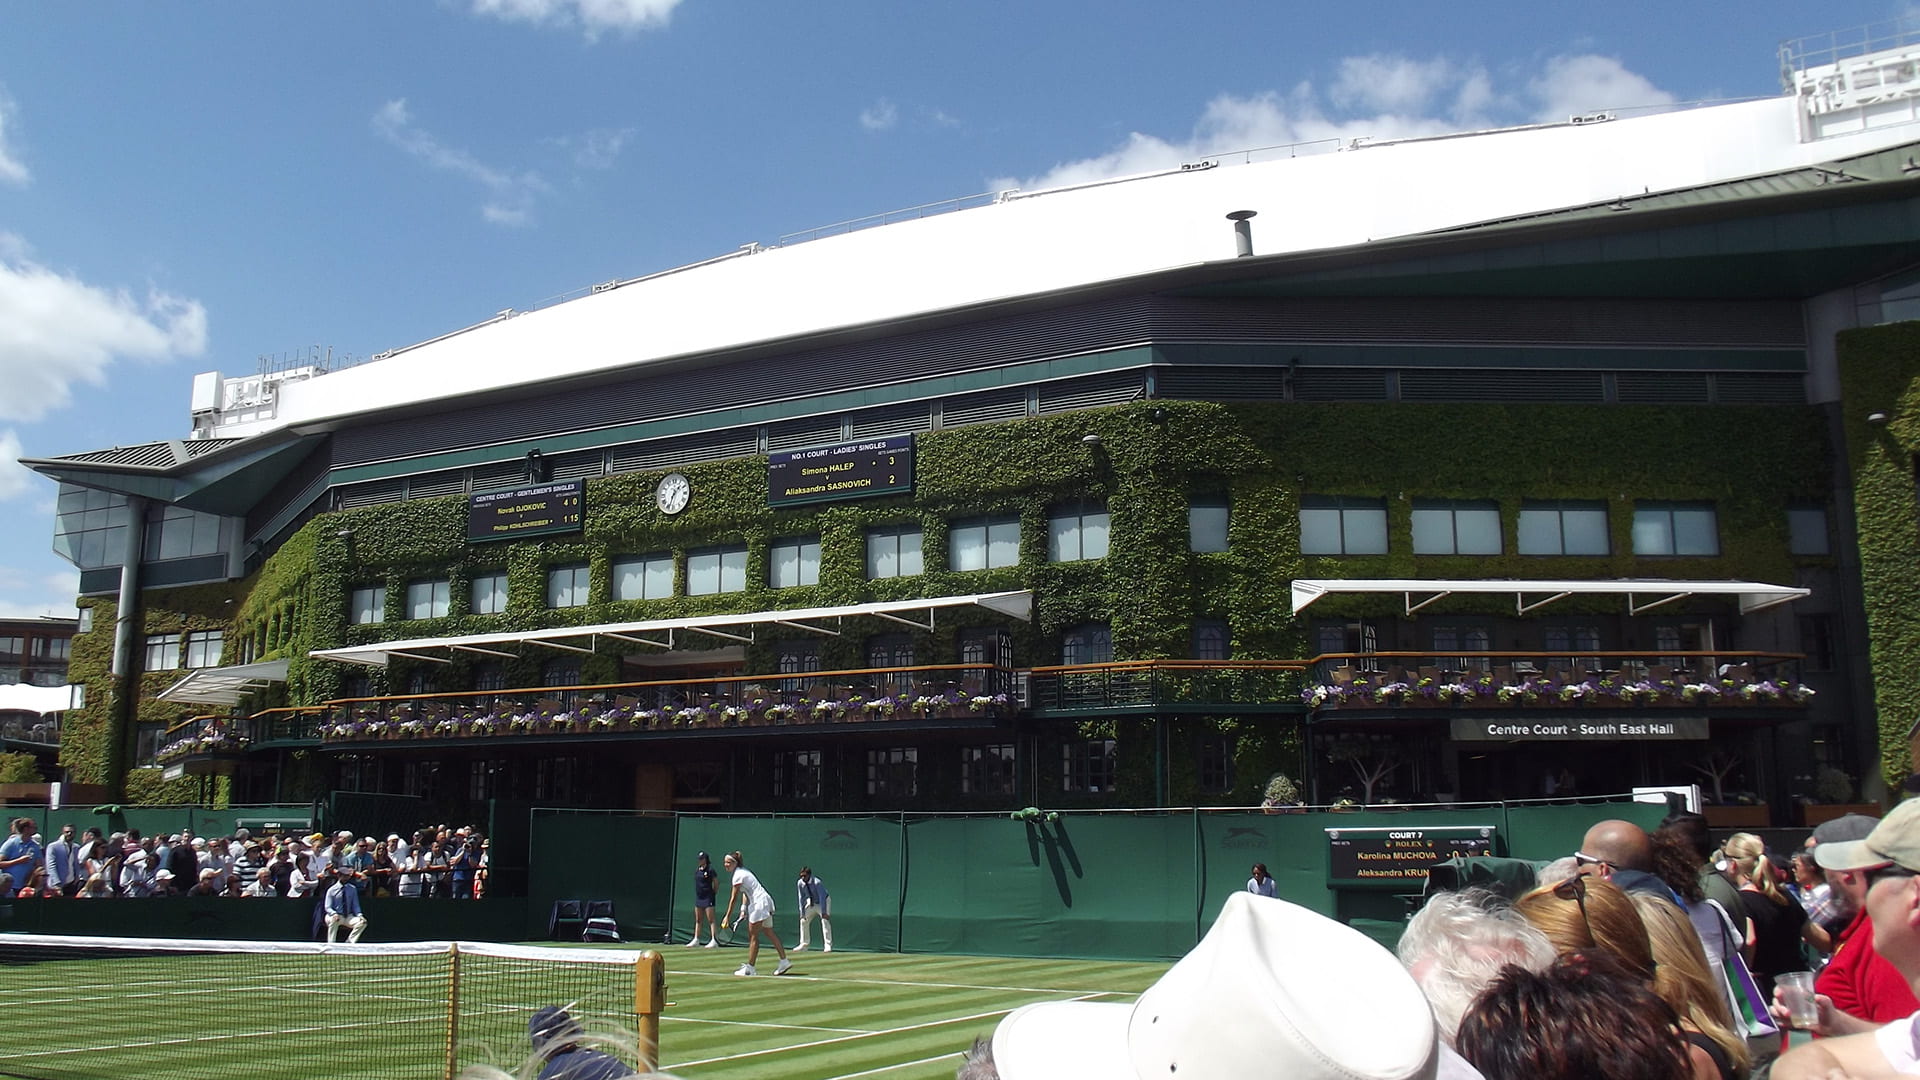 Wimbledon scene with Centre Court in background